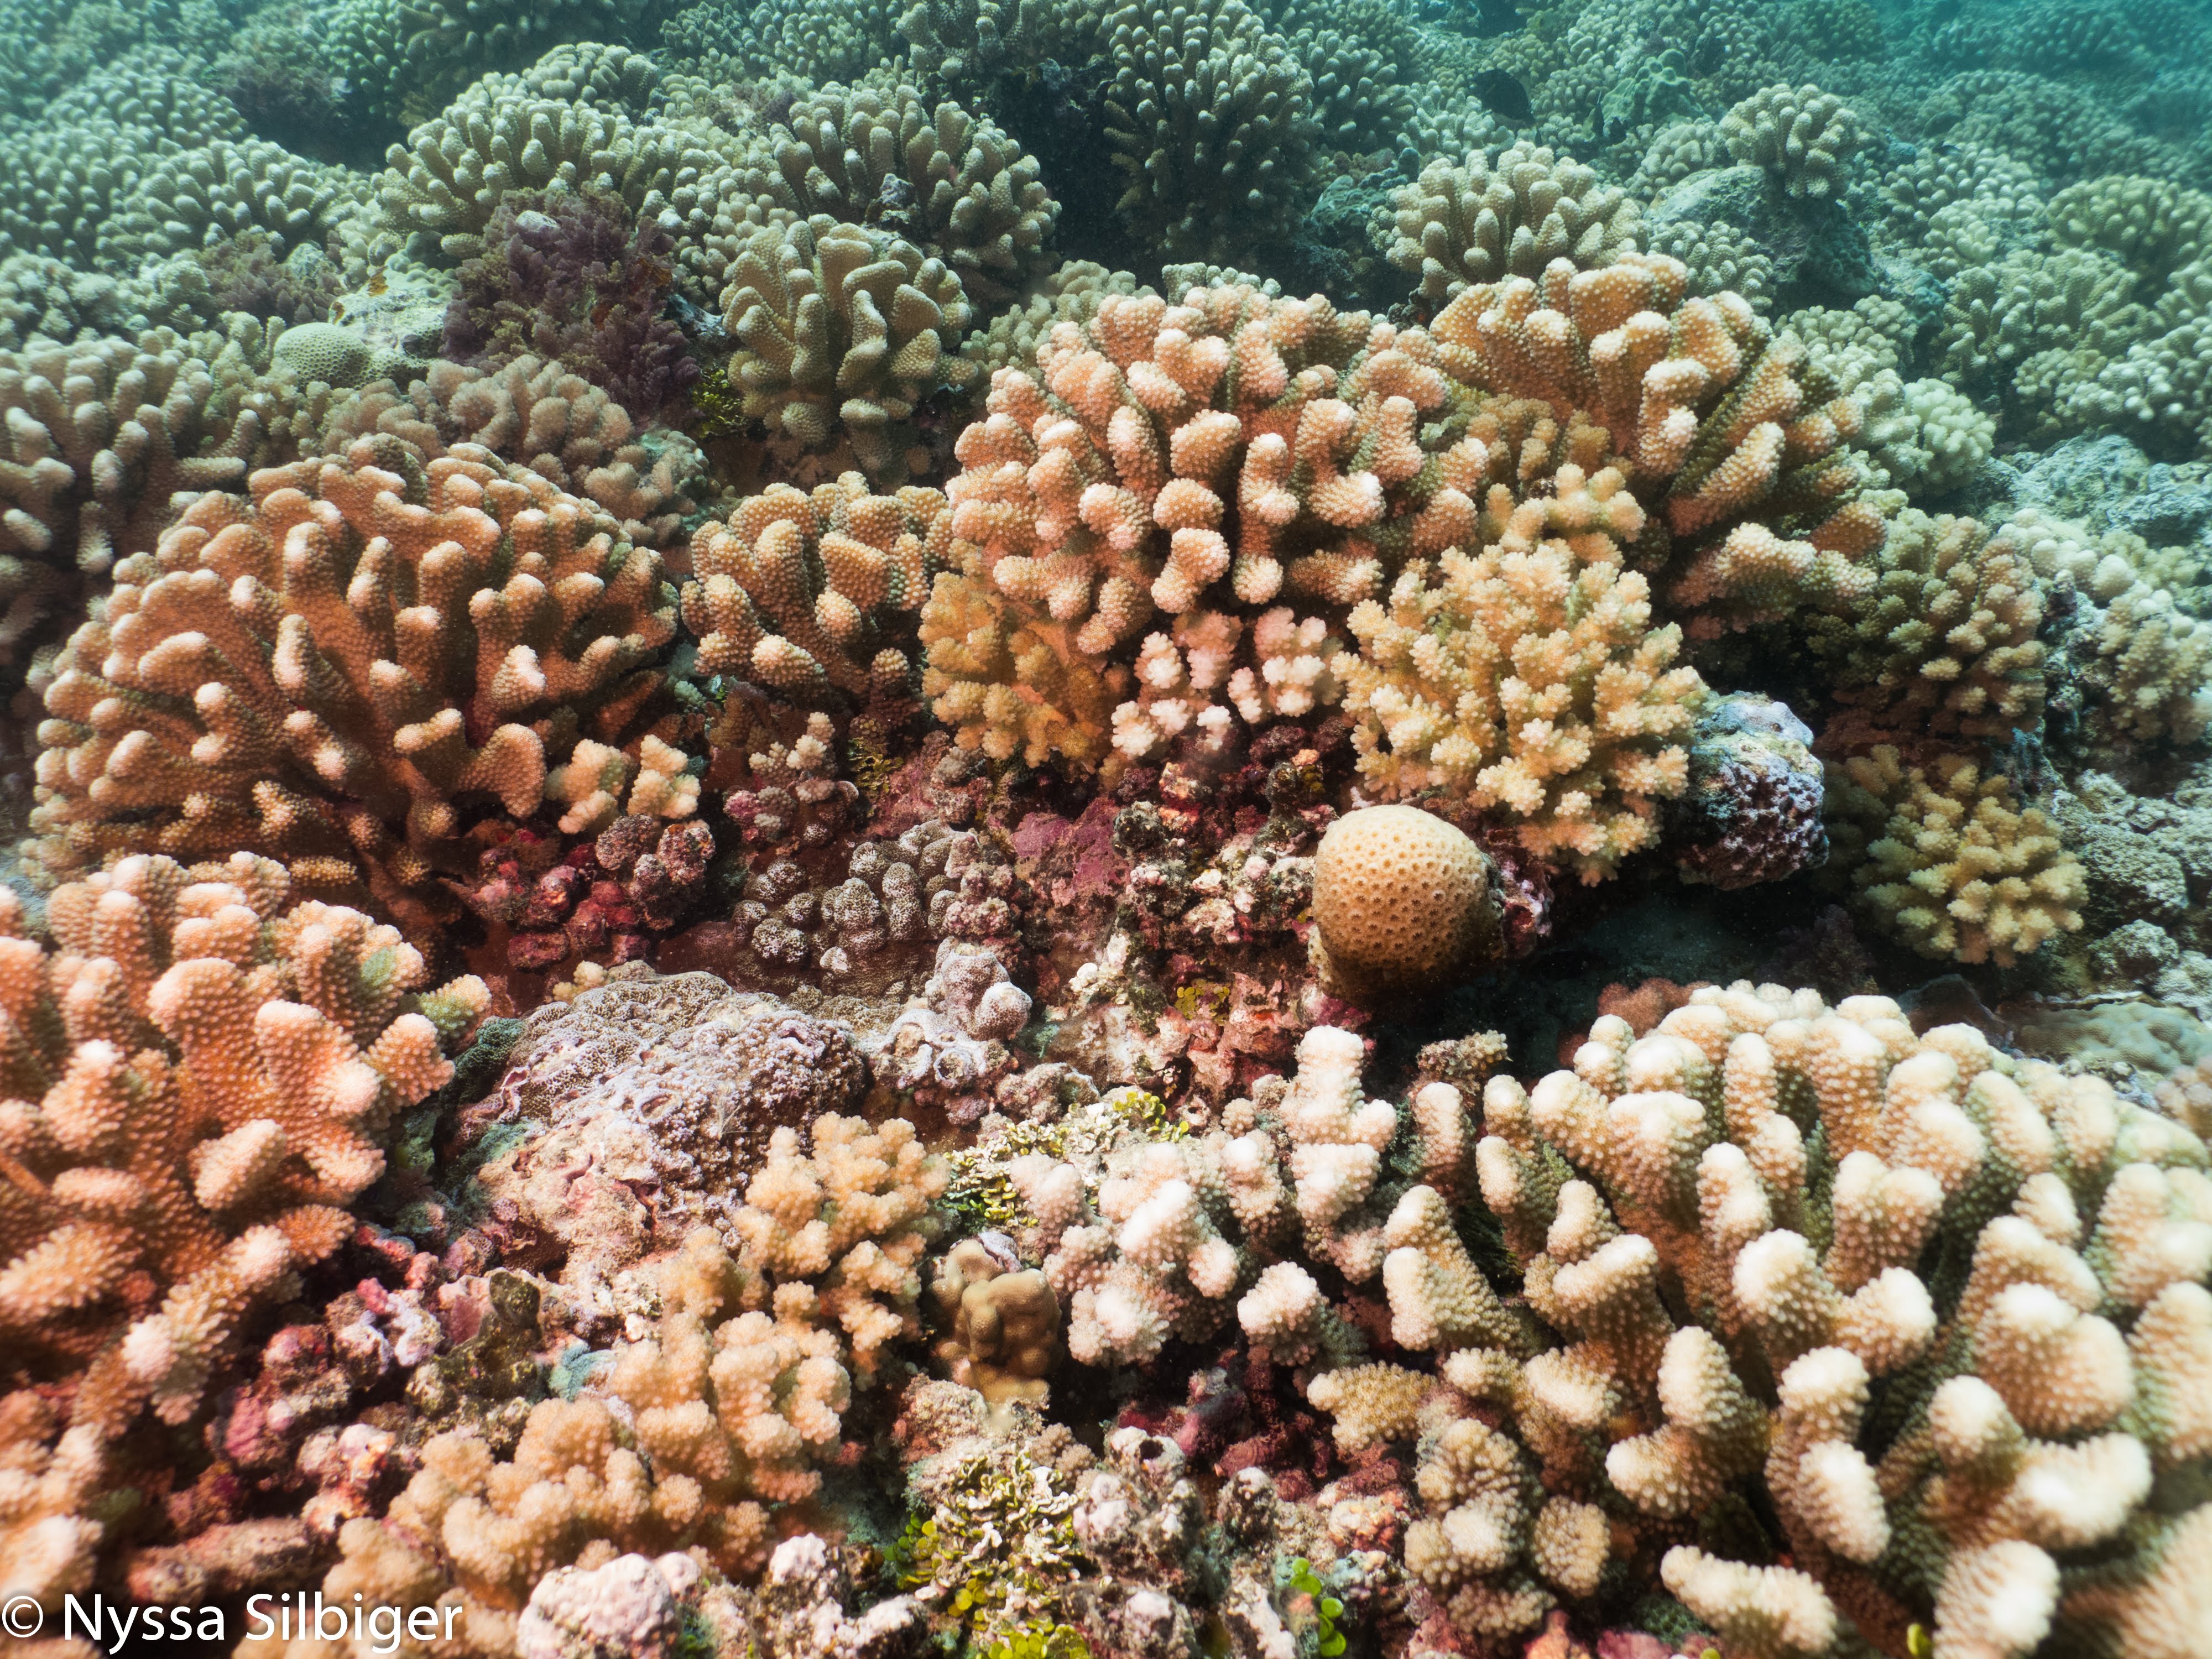 Coral Reef photographed in Mo'orea, French Polynesia. Photo courtesy of Nyssa Silbiger